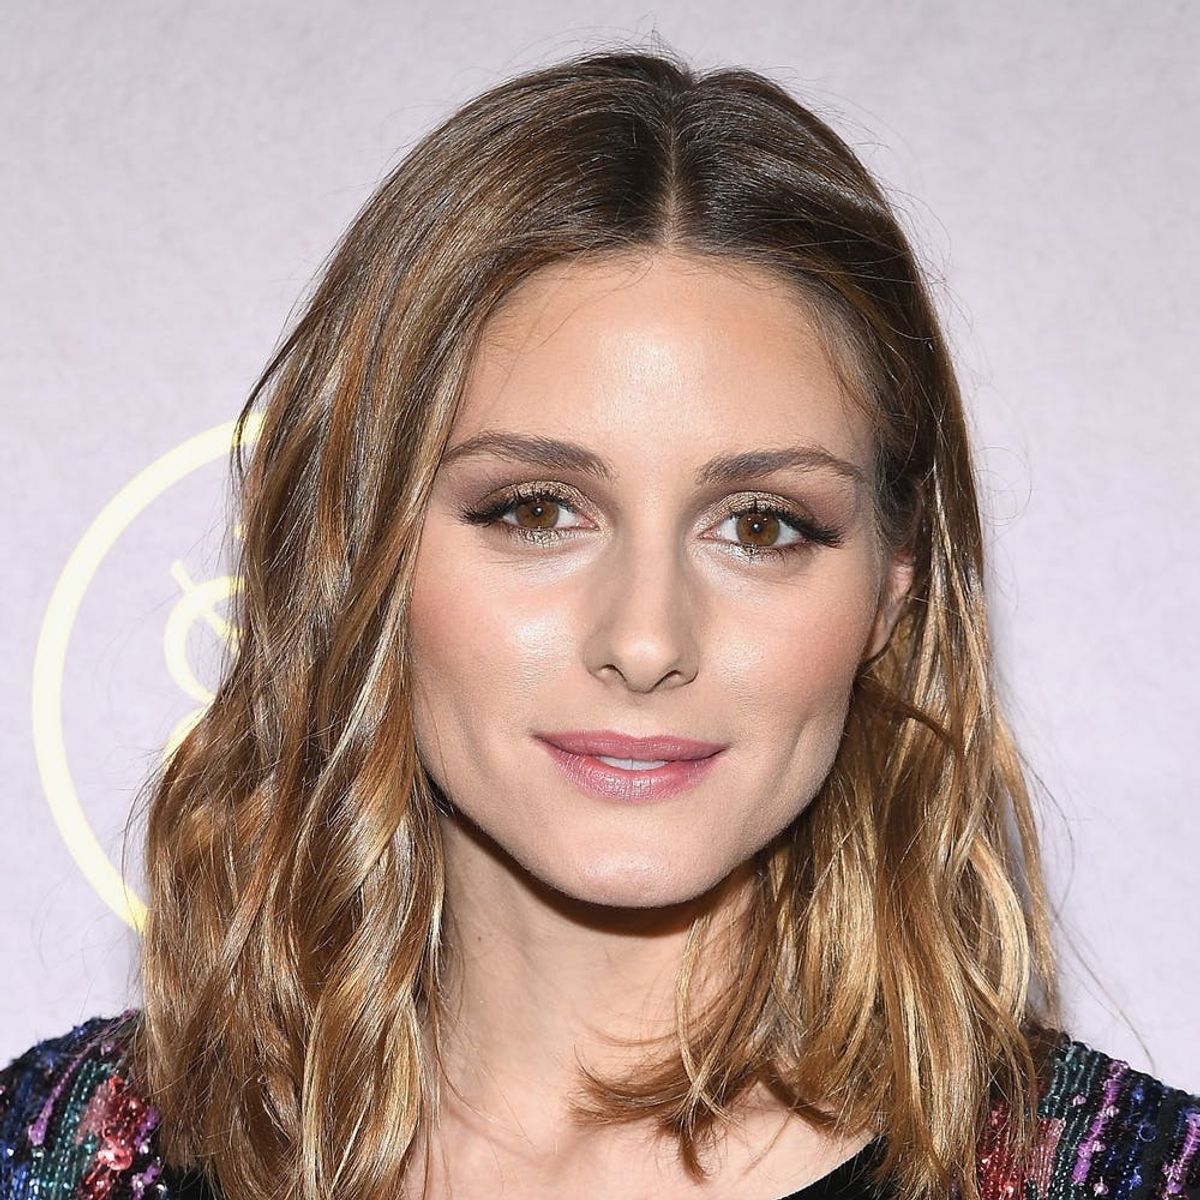 Olivia Palermo x Meli Melo Created the Must-Have Bag for Fall 2017